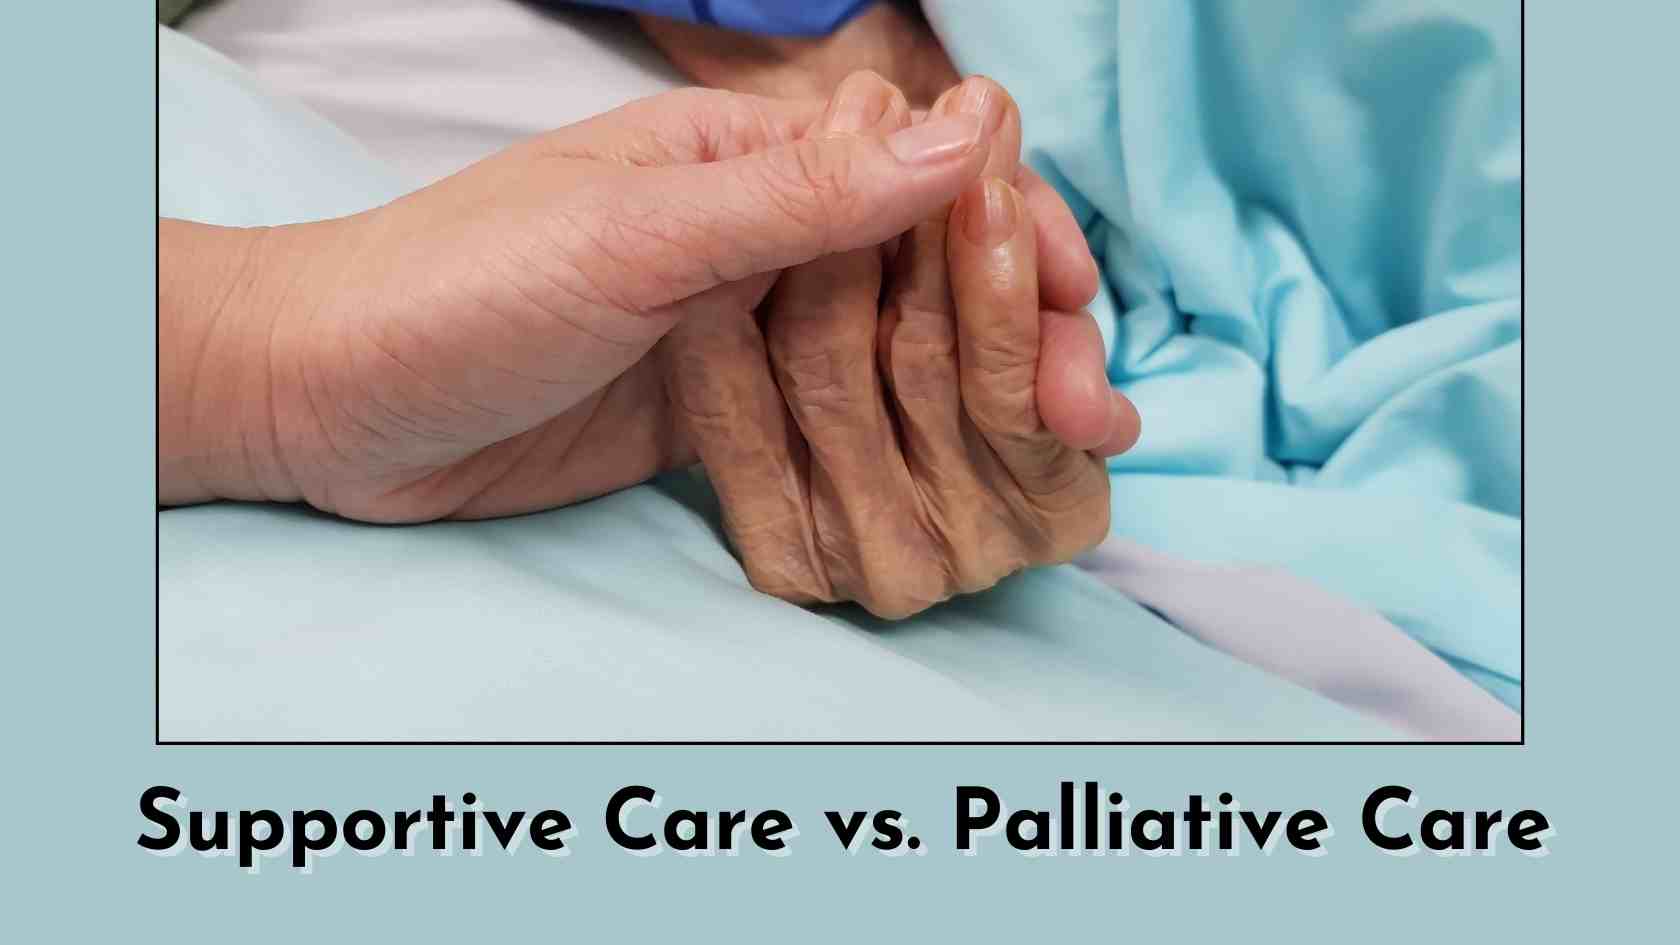 Main Distinctions Between Supportive Care and Palliative Care